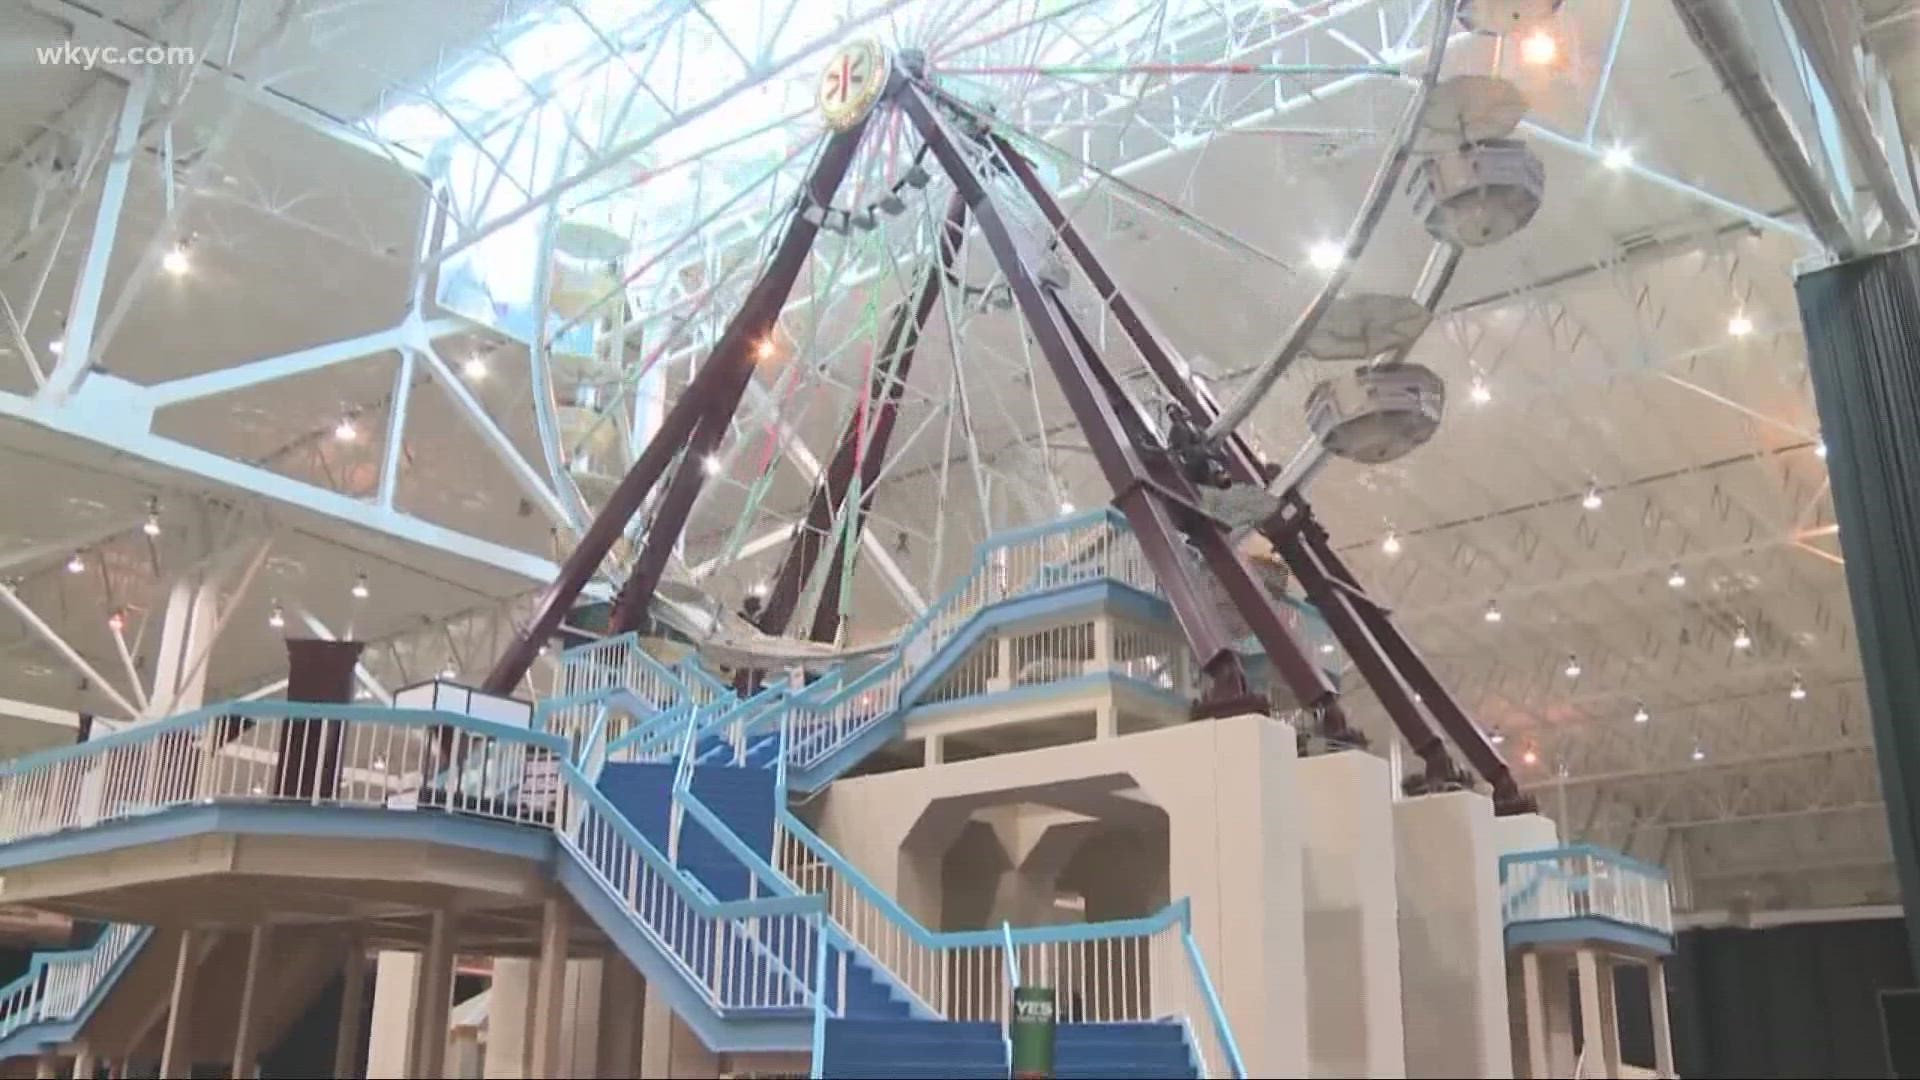 For 30 years, the iconic ferris wheel has been a fixture inside of Cleveland's I-X Center.